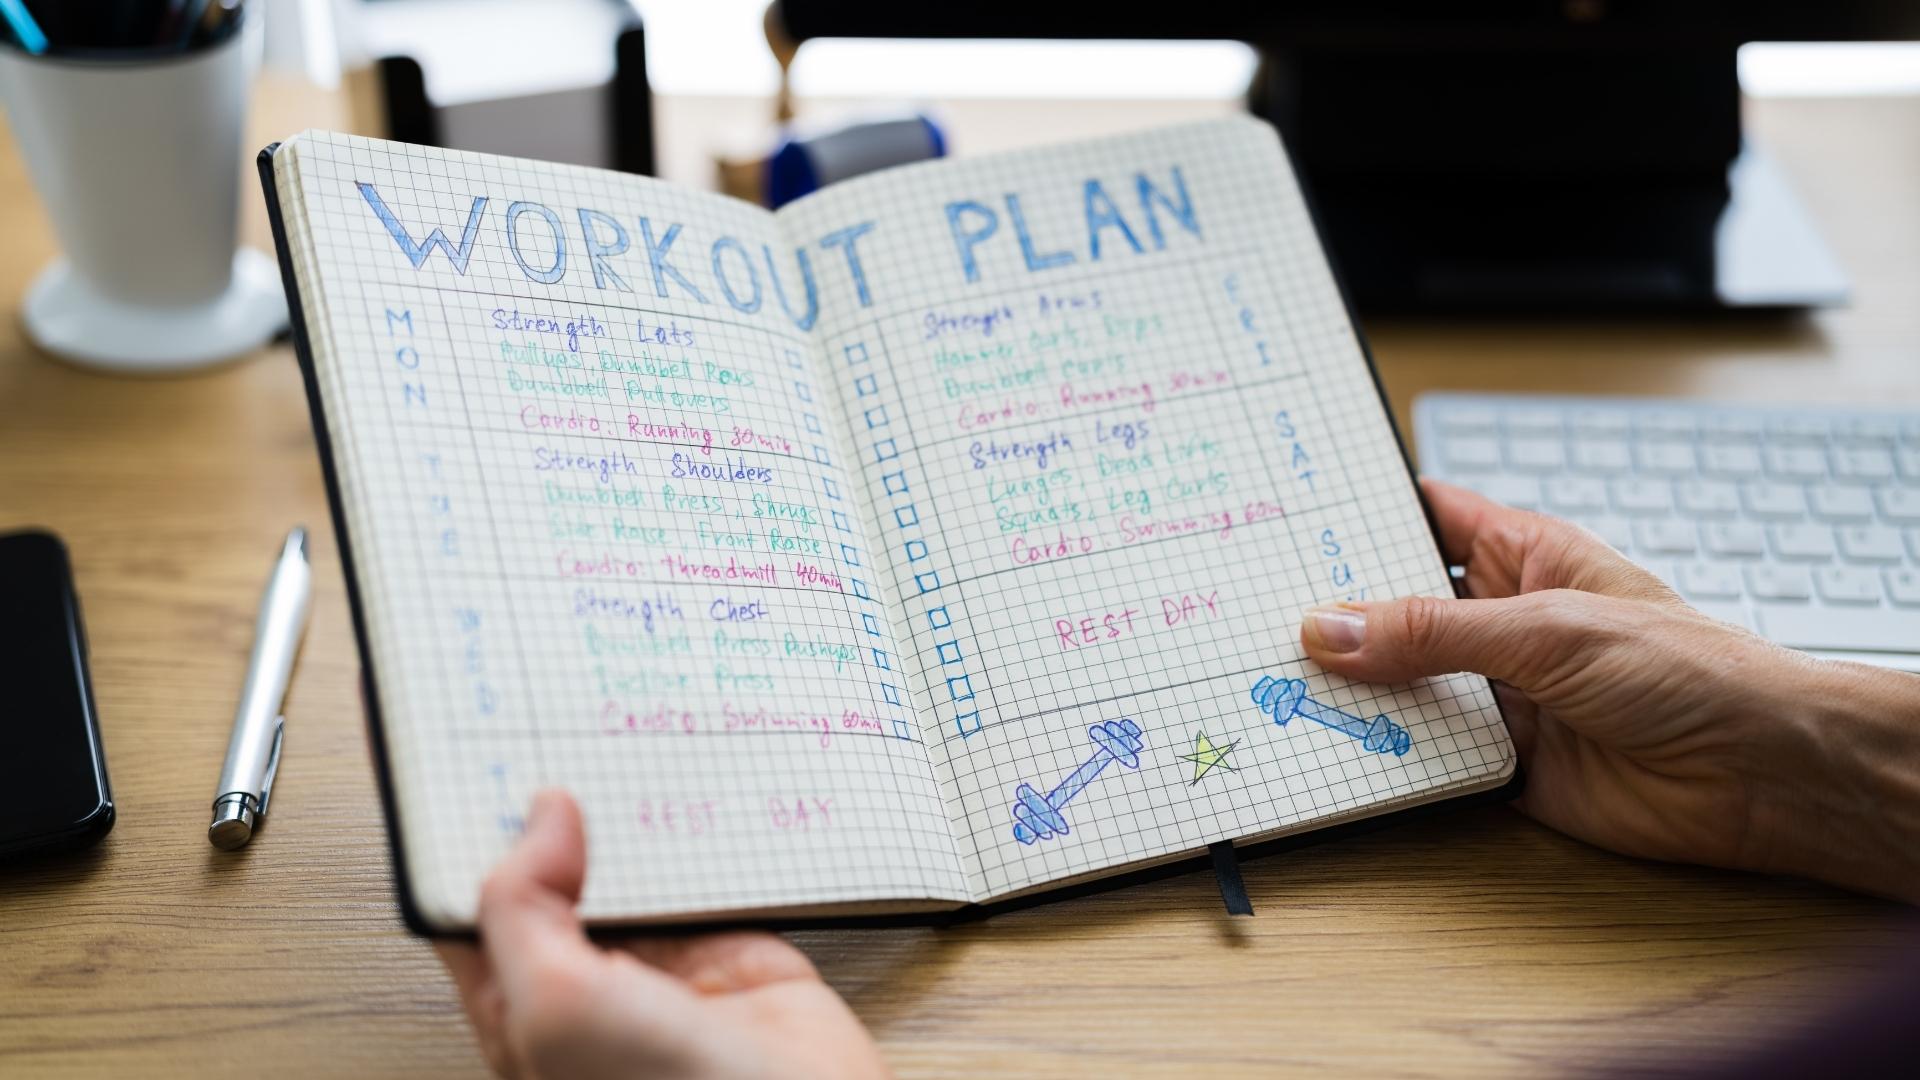 What Does an Optimal Weekly Workout Routine Look Like?